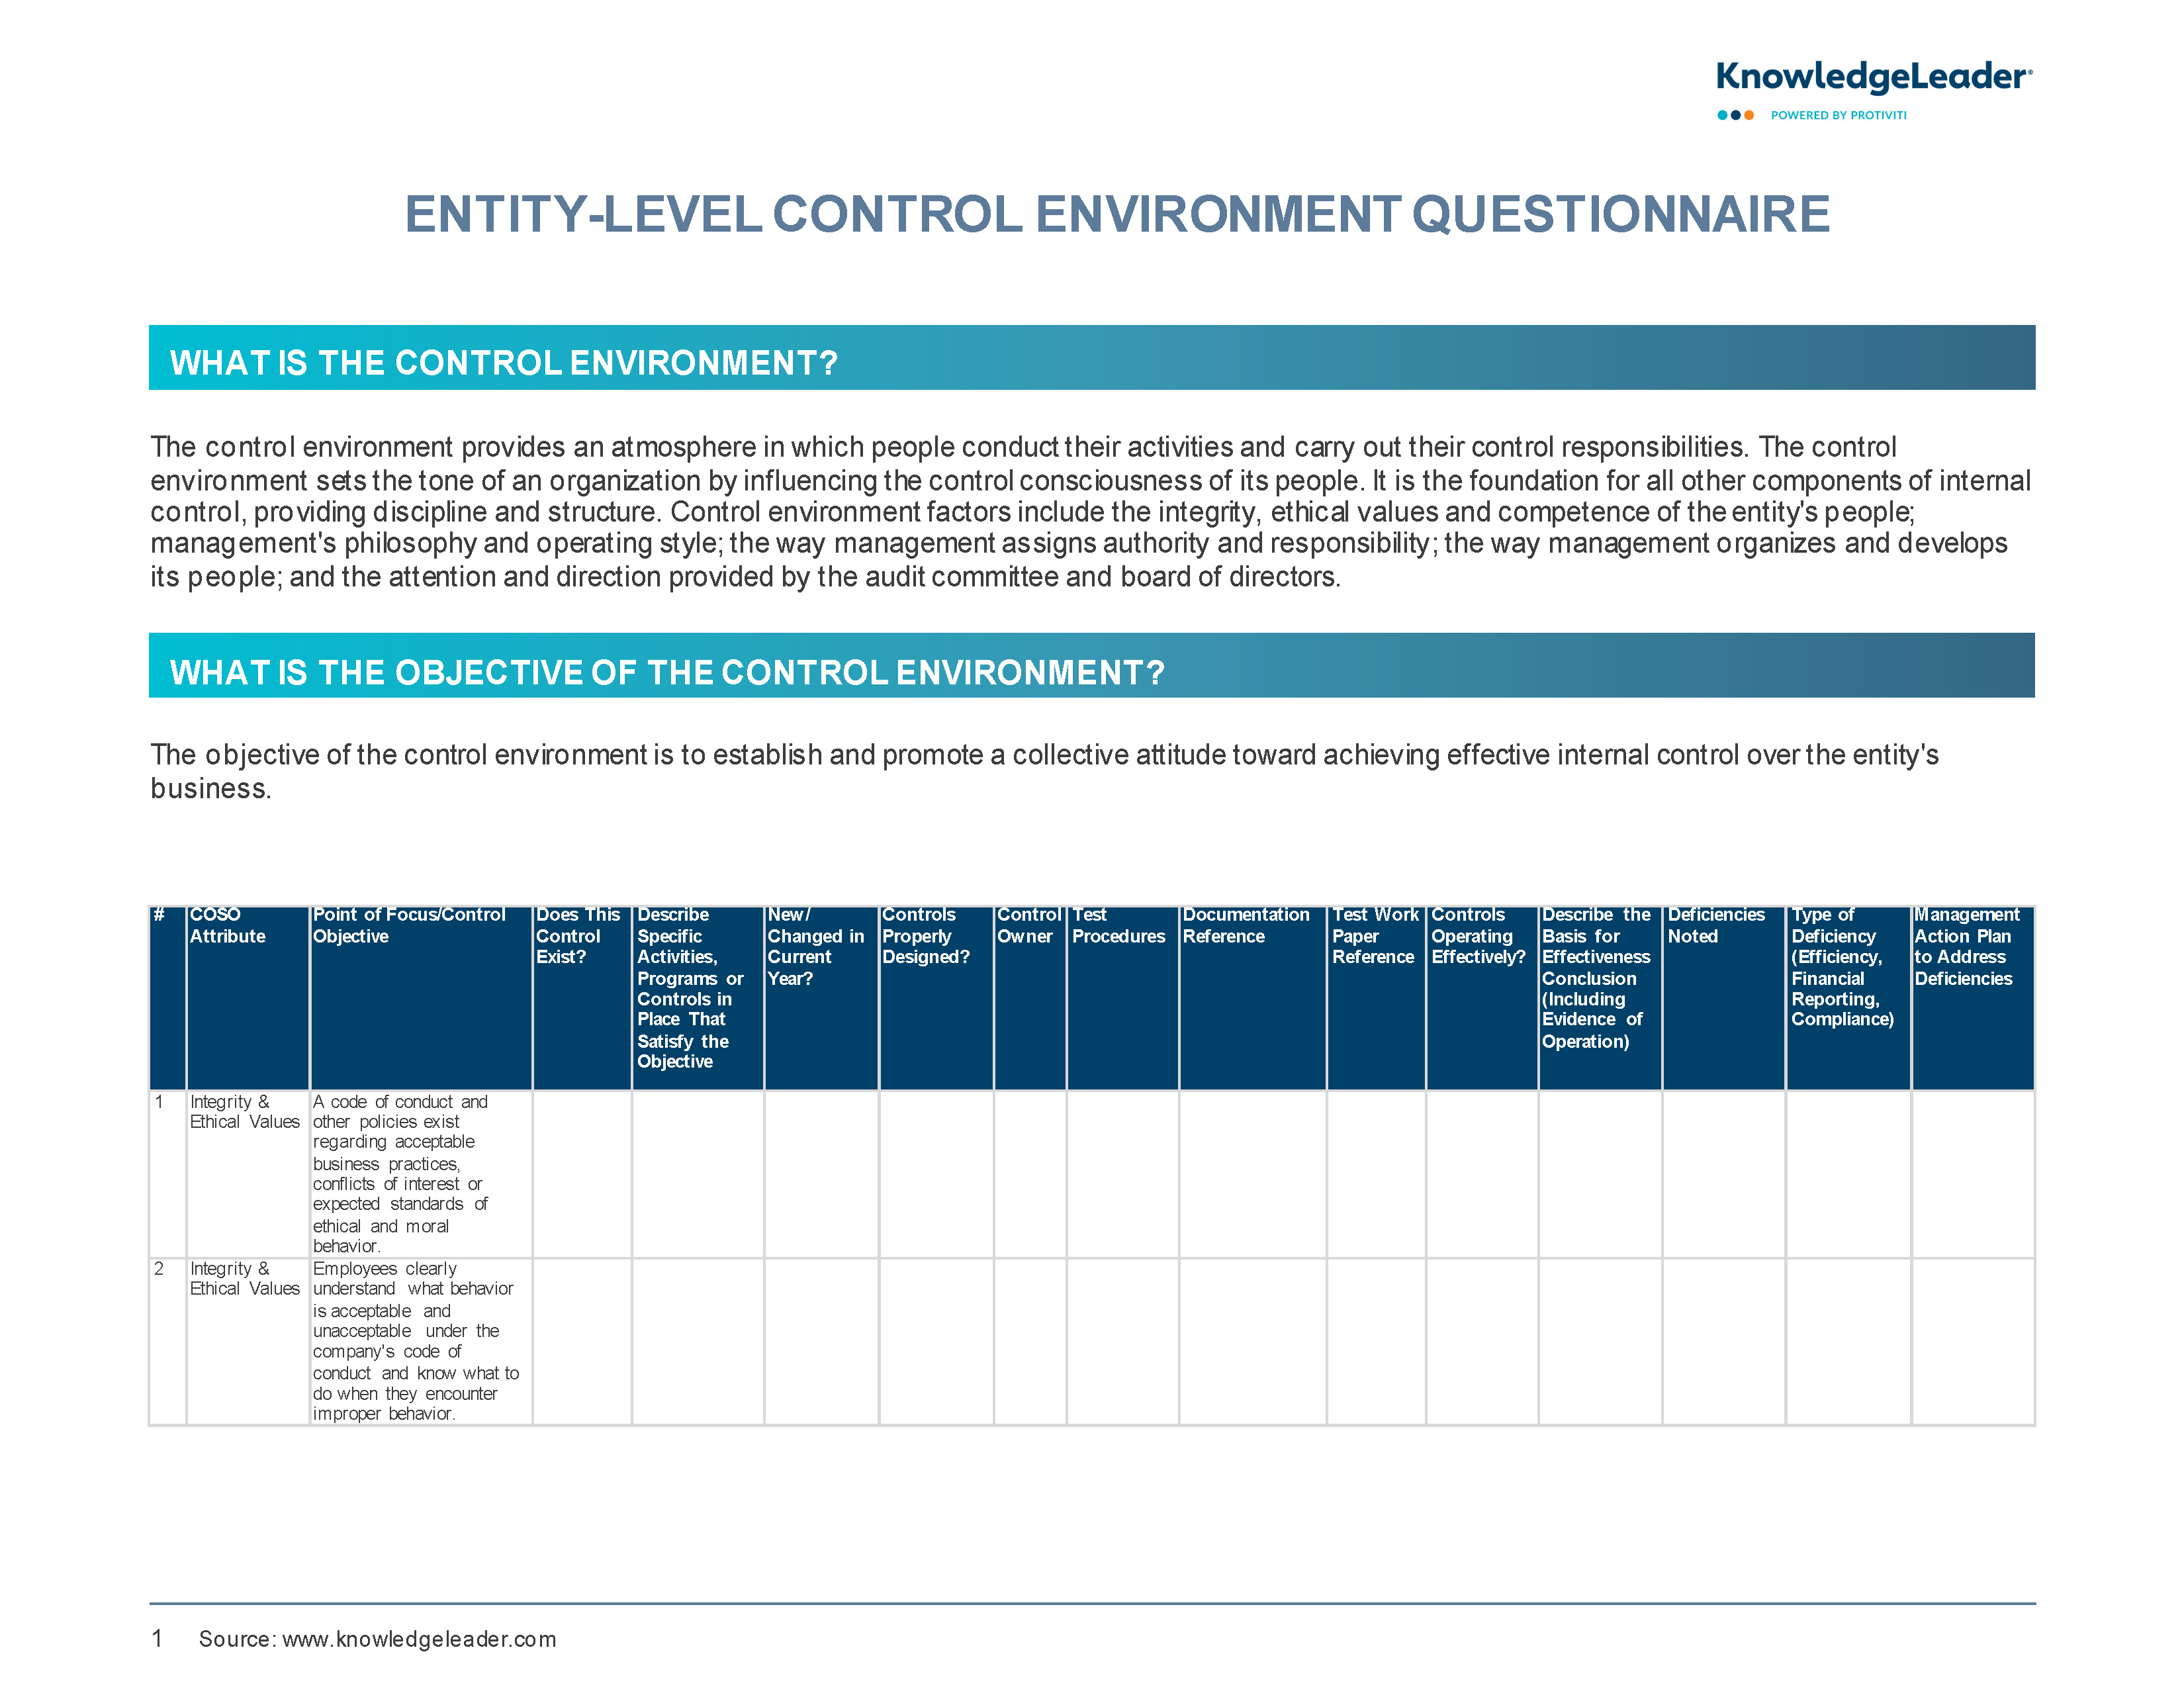 Screenshot of the first page of Entity-Level Control Environment Questionnaire